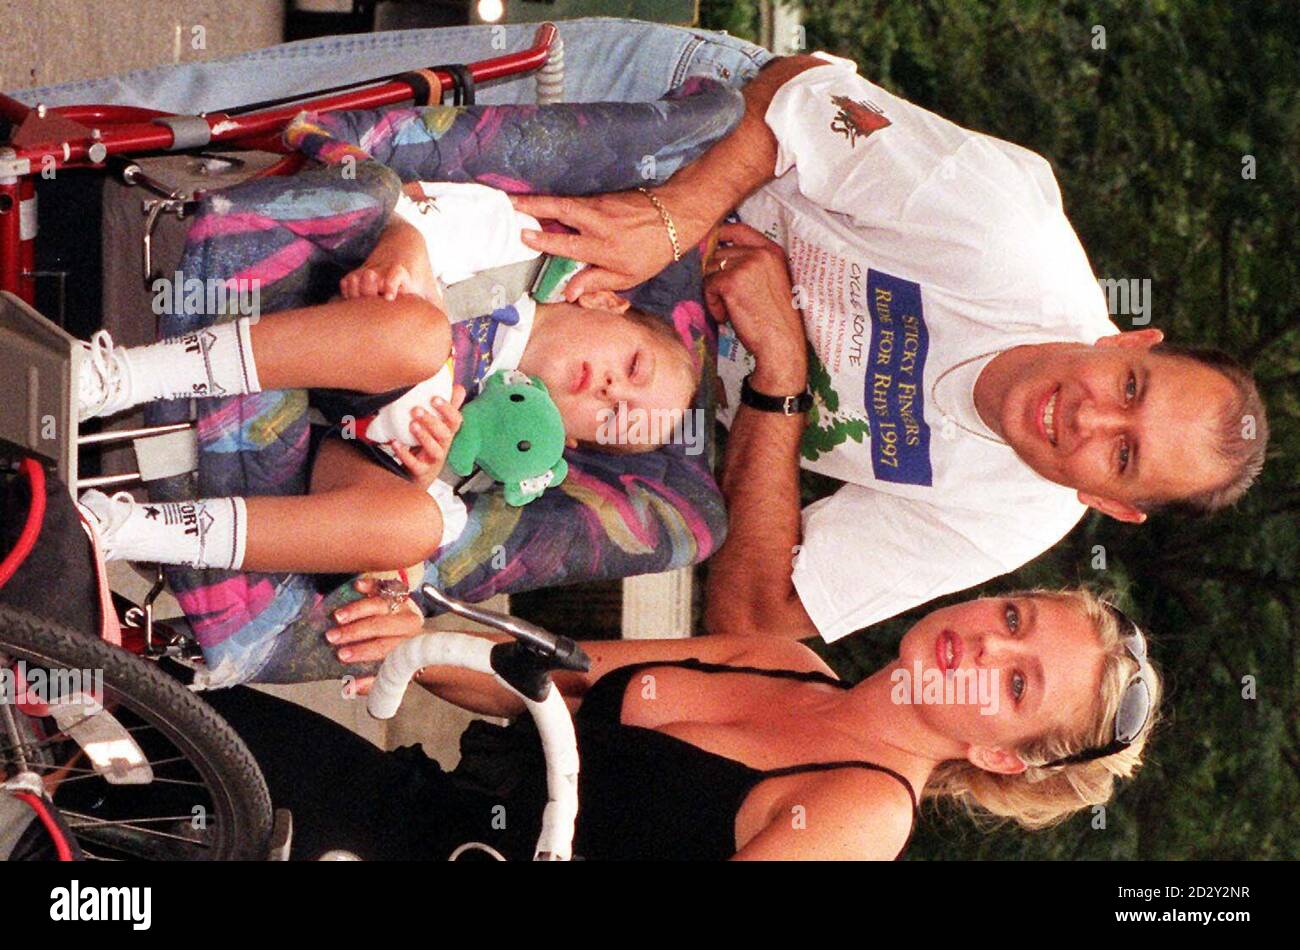 Ex Page 3 model Suzanne Mizzi with Barry Daniels and his son Rhys who suffers from Batten's Disease outside Sticky Fingers Restaurant in London today (Monday) - the final destination for the 'Ride for Rhys' fundraising bike ride.  The Daniels Trust was first launched in 1994 at the London Sticky Fingers and raises money to support families with seriously ill children. Photo by Neil Munns/PA Stock Photo